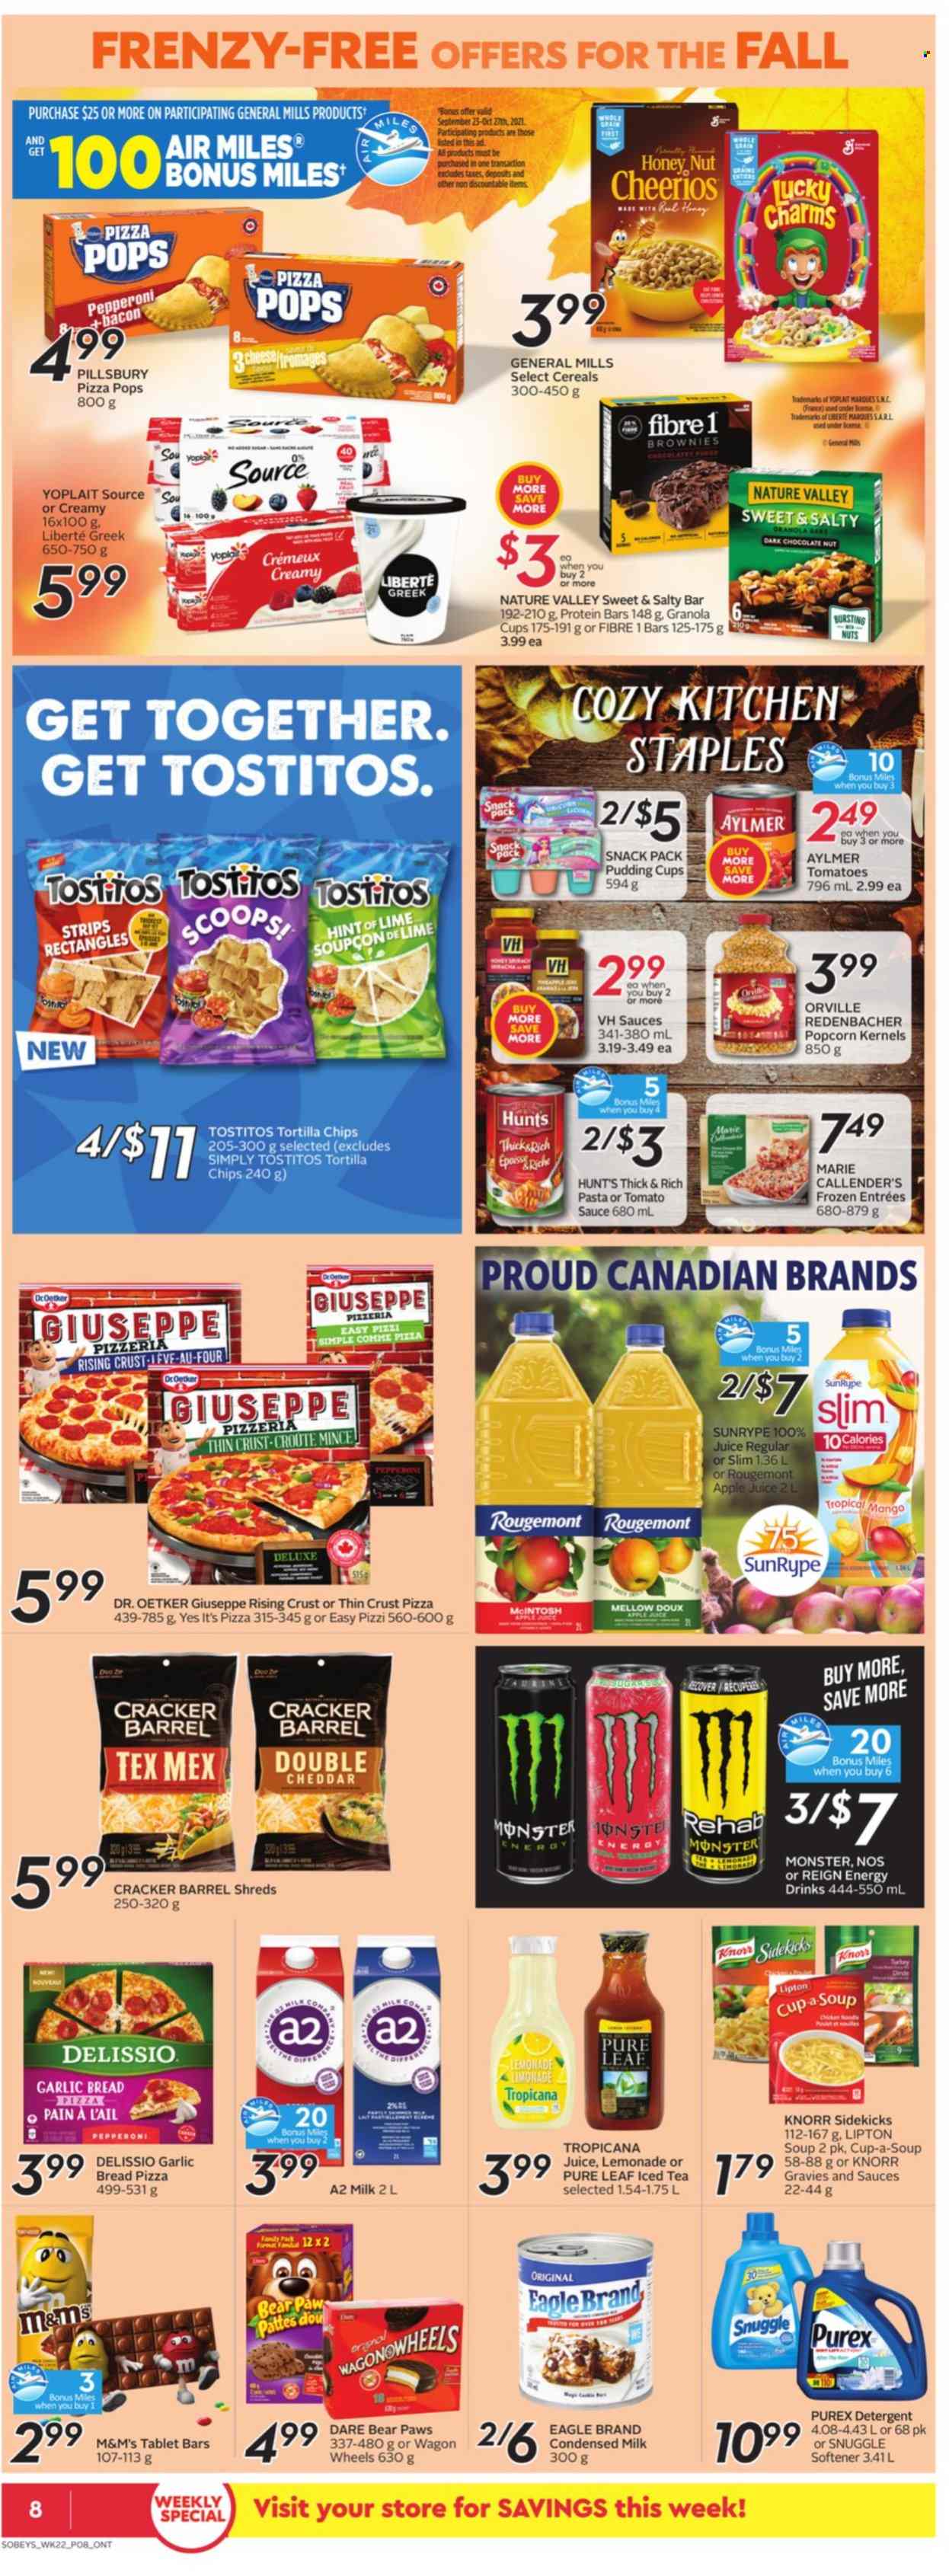 thumbnail - Sobeys Flyer - September 23, 2021 - September 29, 2021 - Sales products - bread, brownies, mango, pizza, soup, Pillsbury, Marie Callender's, bacon, pepperoni, Dr. Oetker, pudding, Yoplait, milk, condensed milk, strips, chocolate, crackers, dark chocolate, tortilla chips, popcorn, Tostitos, tomato sauce, cereals, Cheerios, protein bar, Nature Valley, apple juice, lemonade, juice, energy drink, Monster, ice tea, Pure Leaf, Snuggle, fabric softener, Purex, Paws, Knorr, detergent, granola, Lipton, M&M's. Page 9.